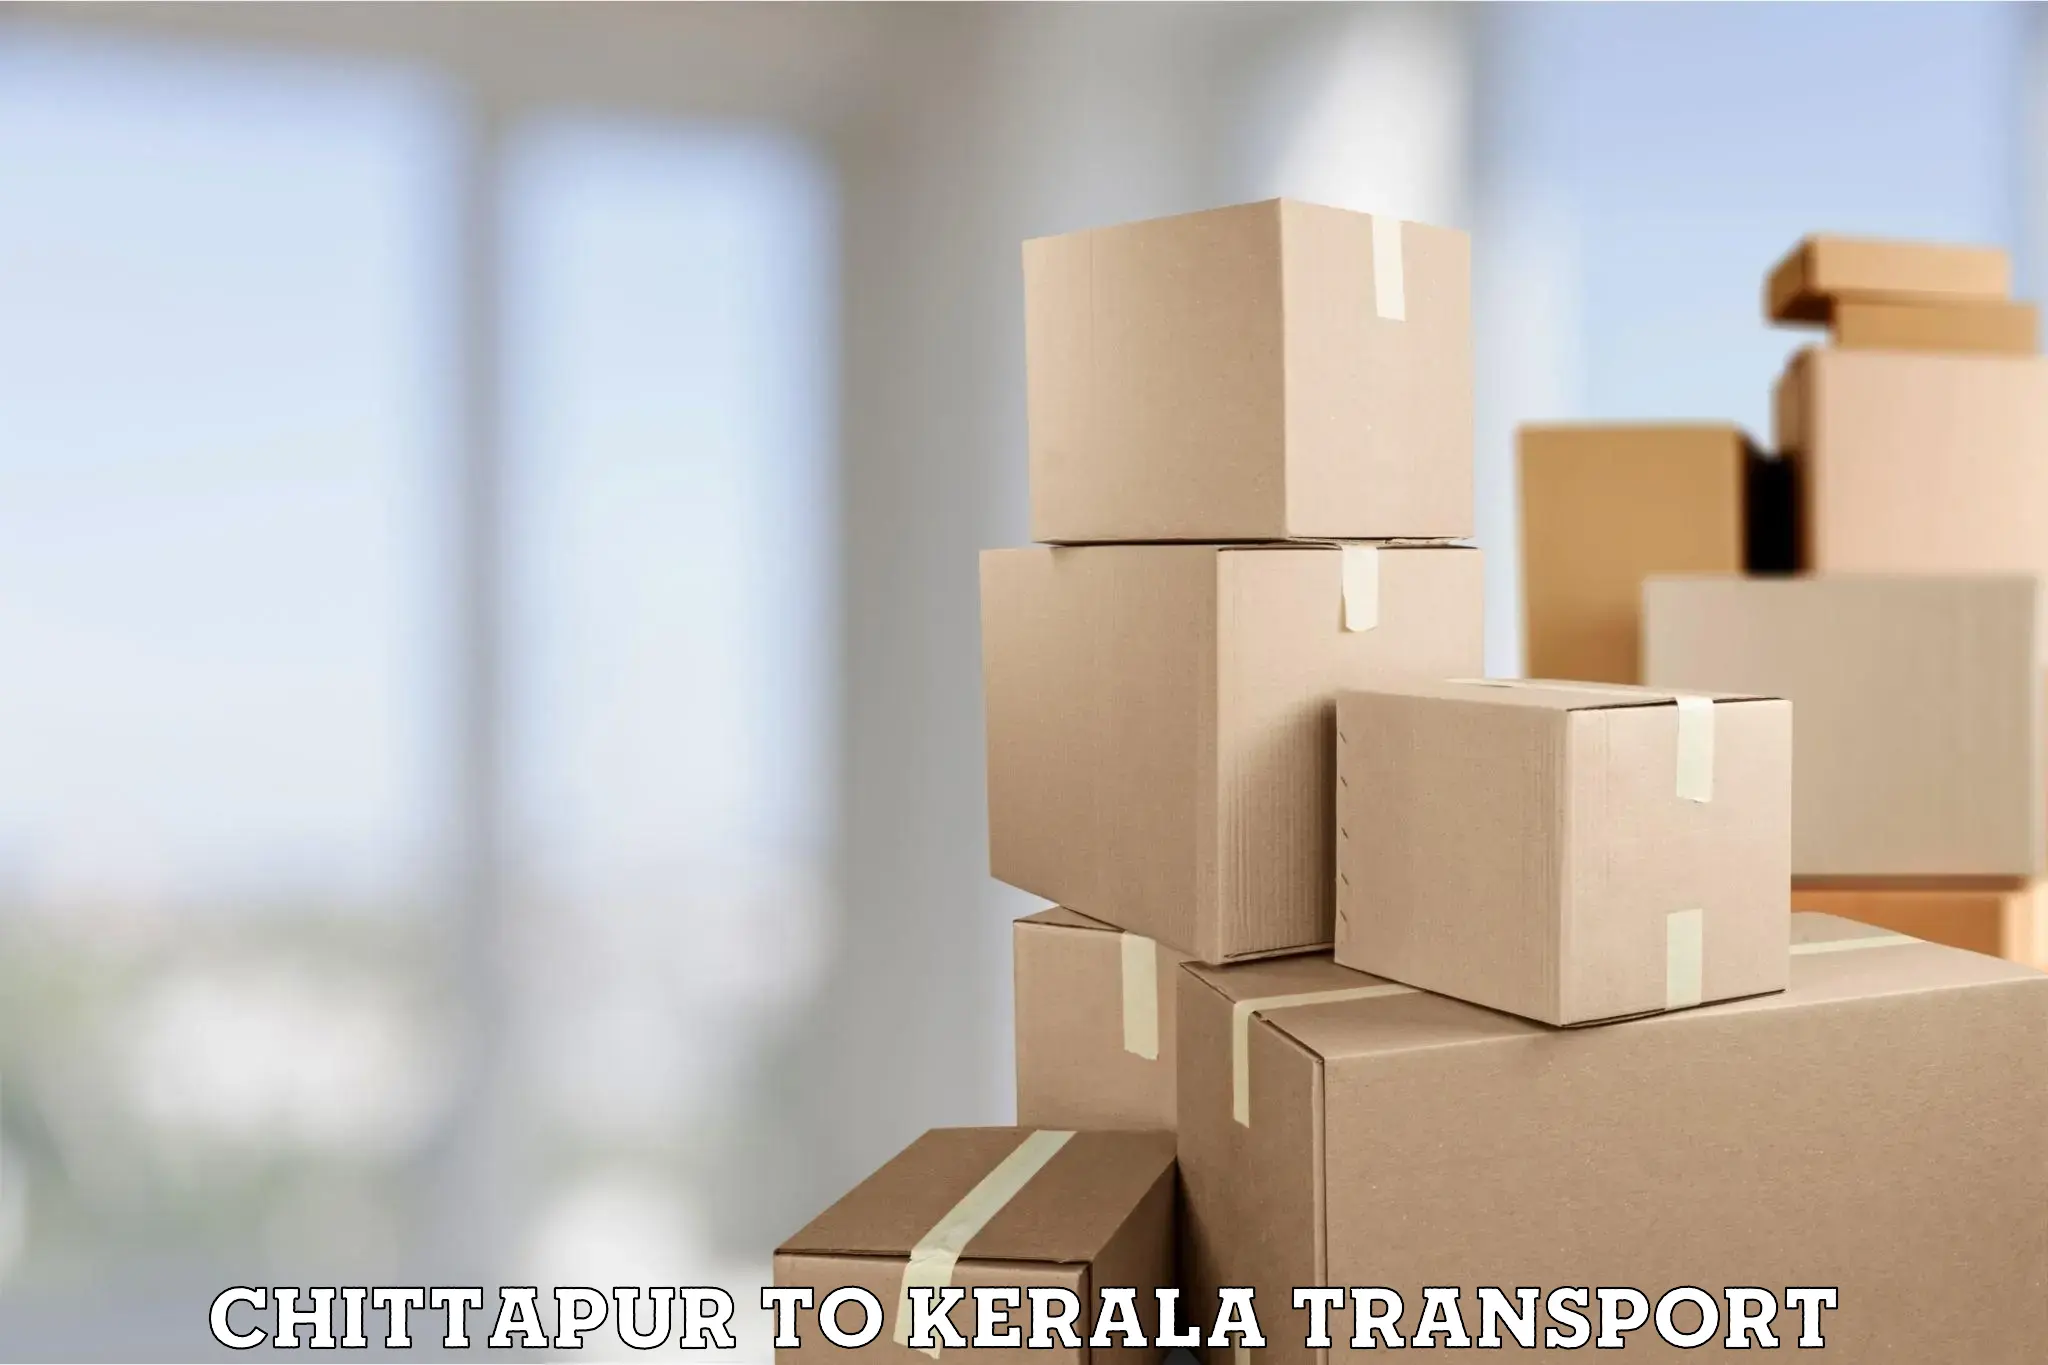 Delivery service Chittapur to Kerala